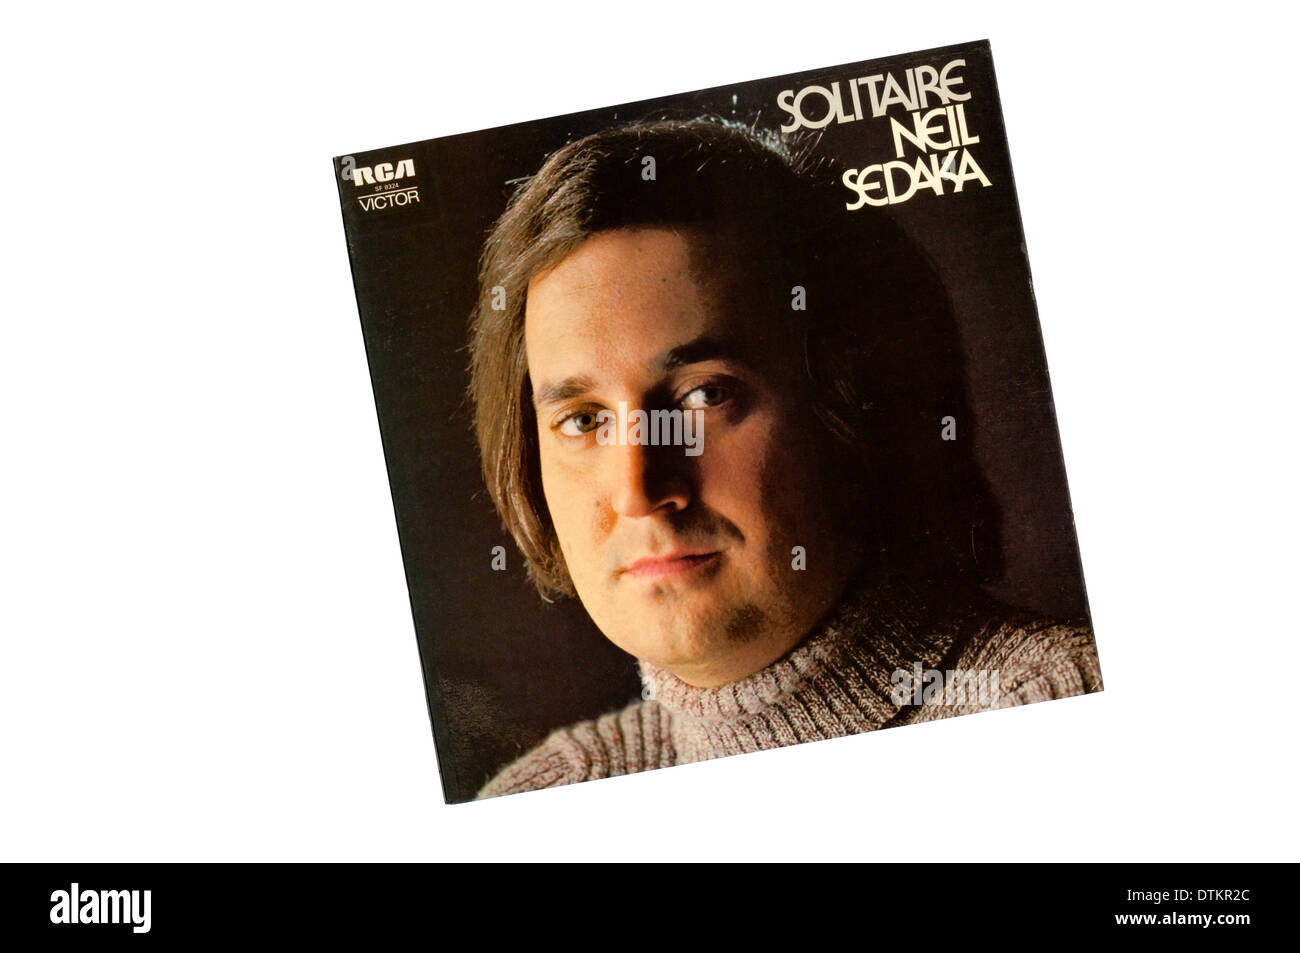 Solitaire was a 1972 album by American singer-songwriter Neil Sedaka. Stock Photo